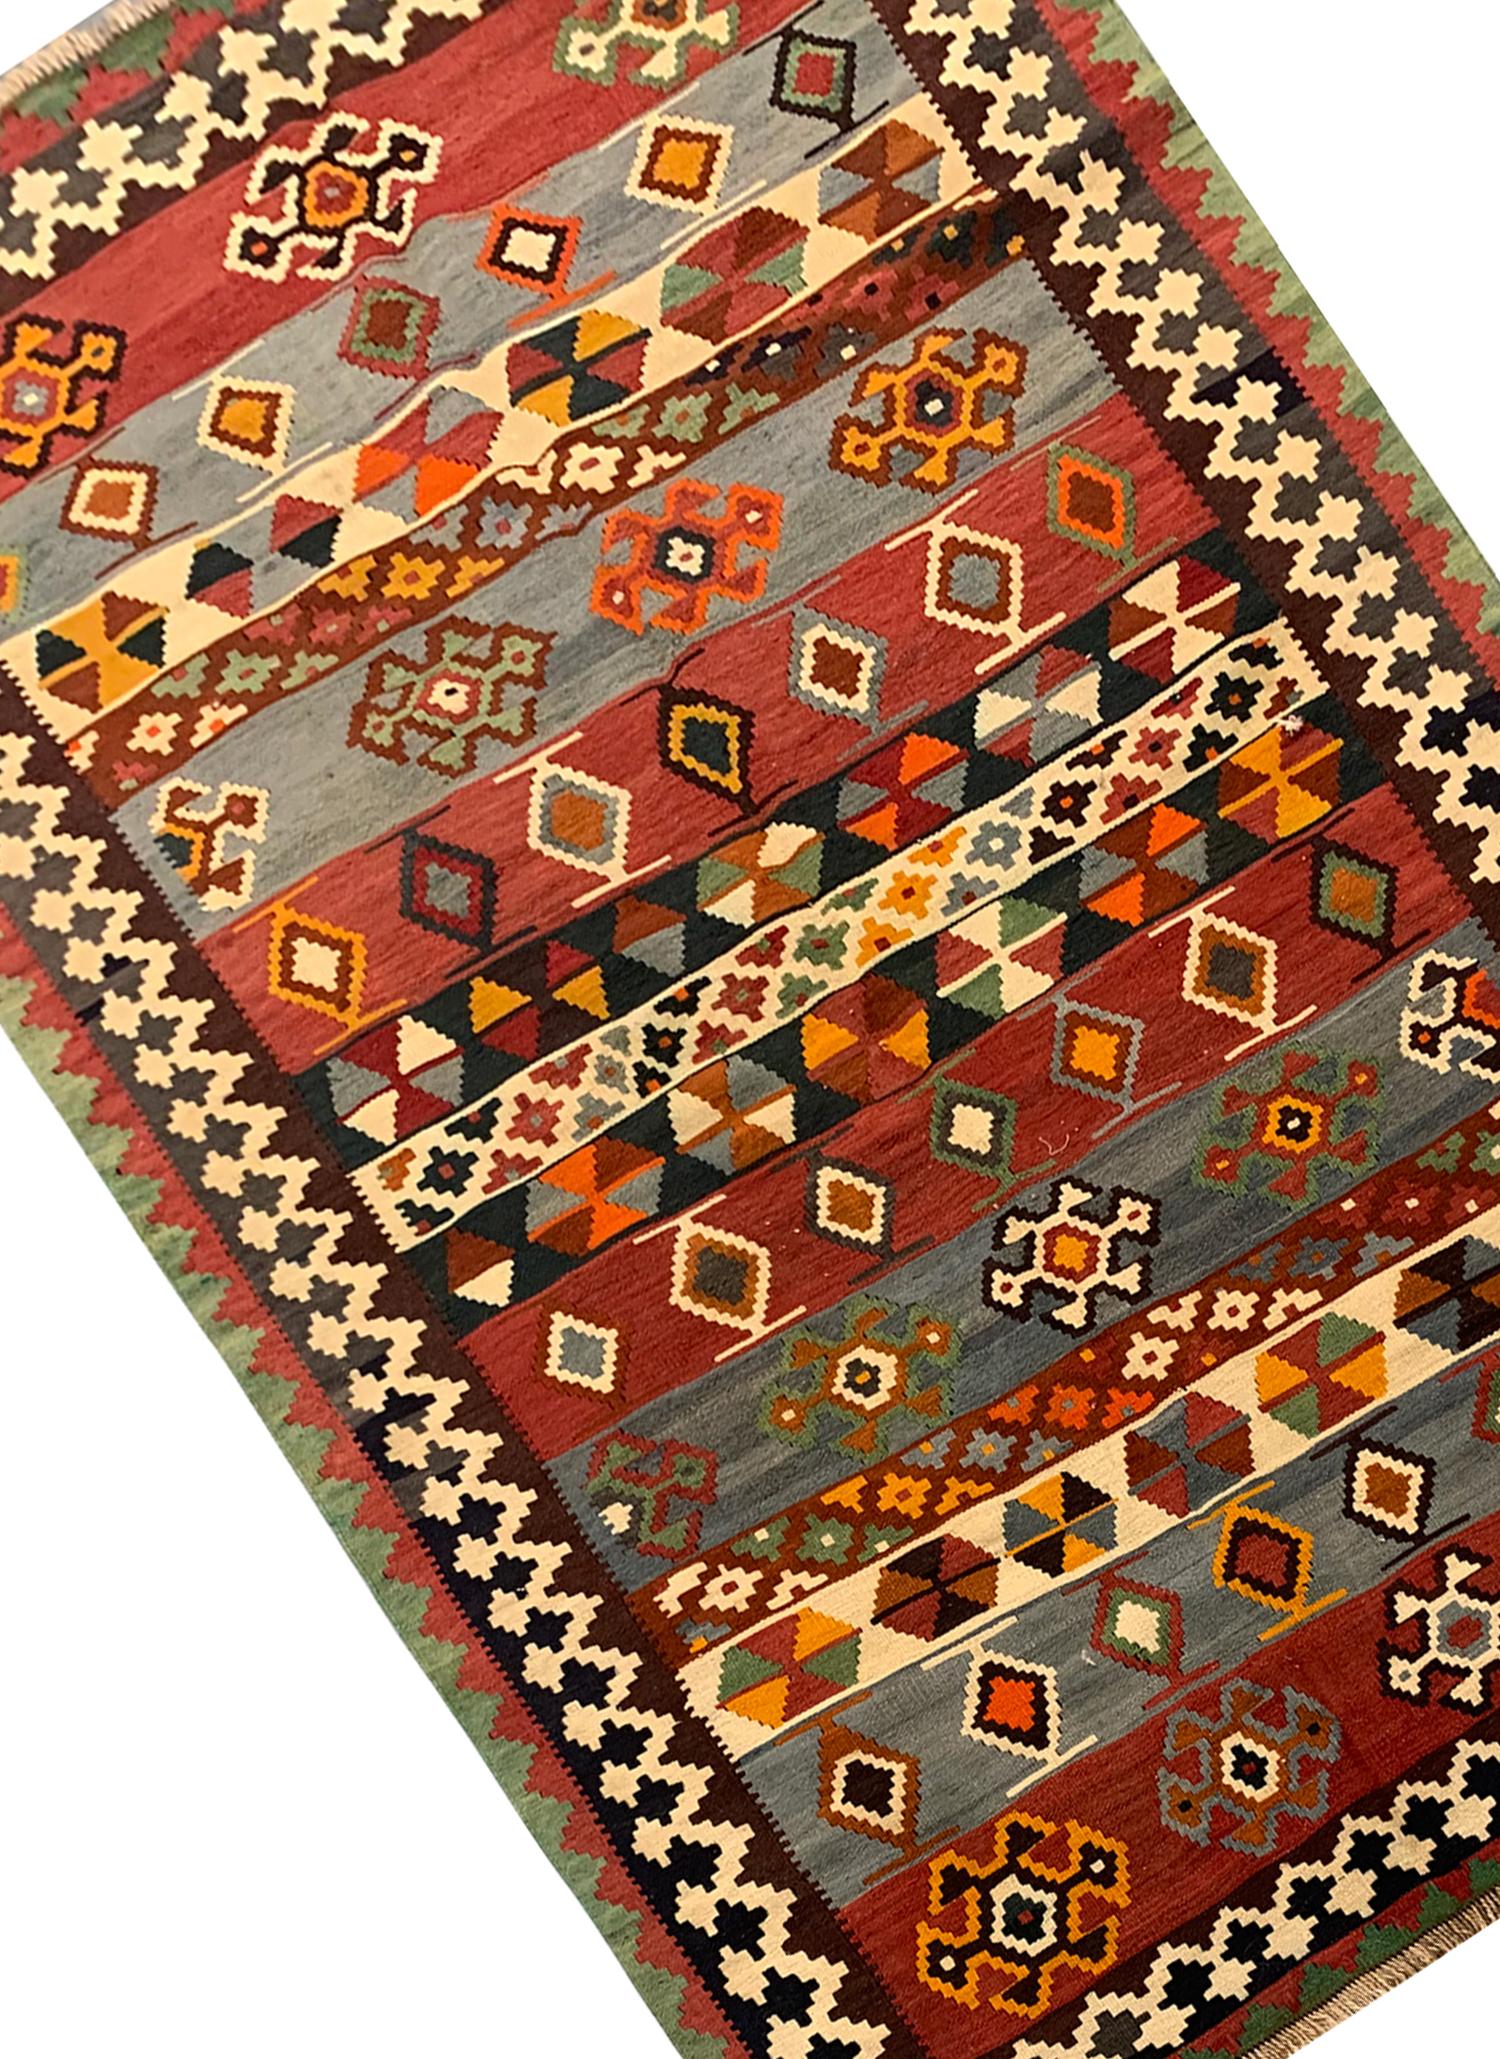 Hand-Knotted Caucasian Kilim Rug Handmade Antique Striped Kilim Traditional Carpet For Sale